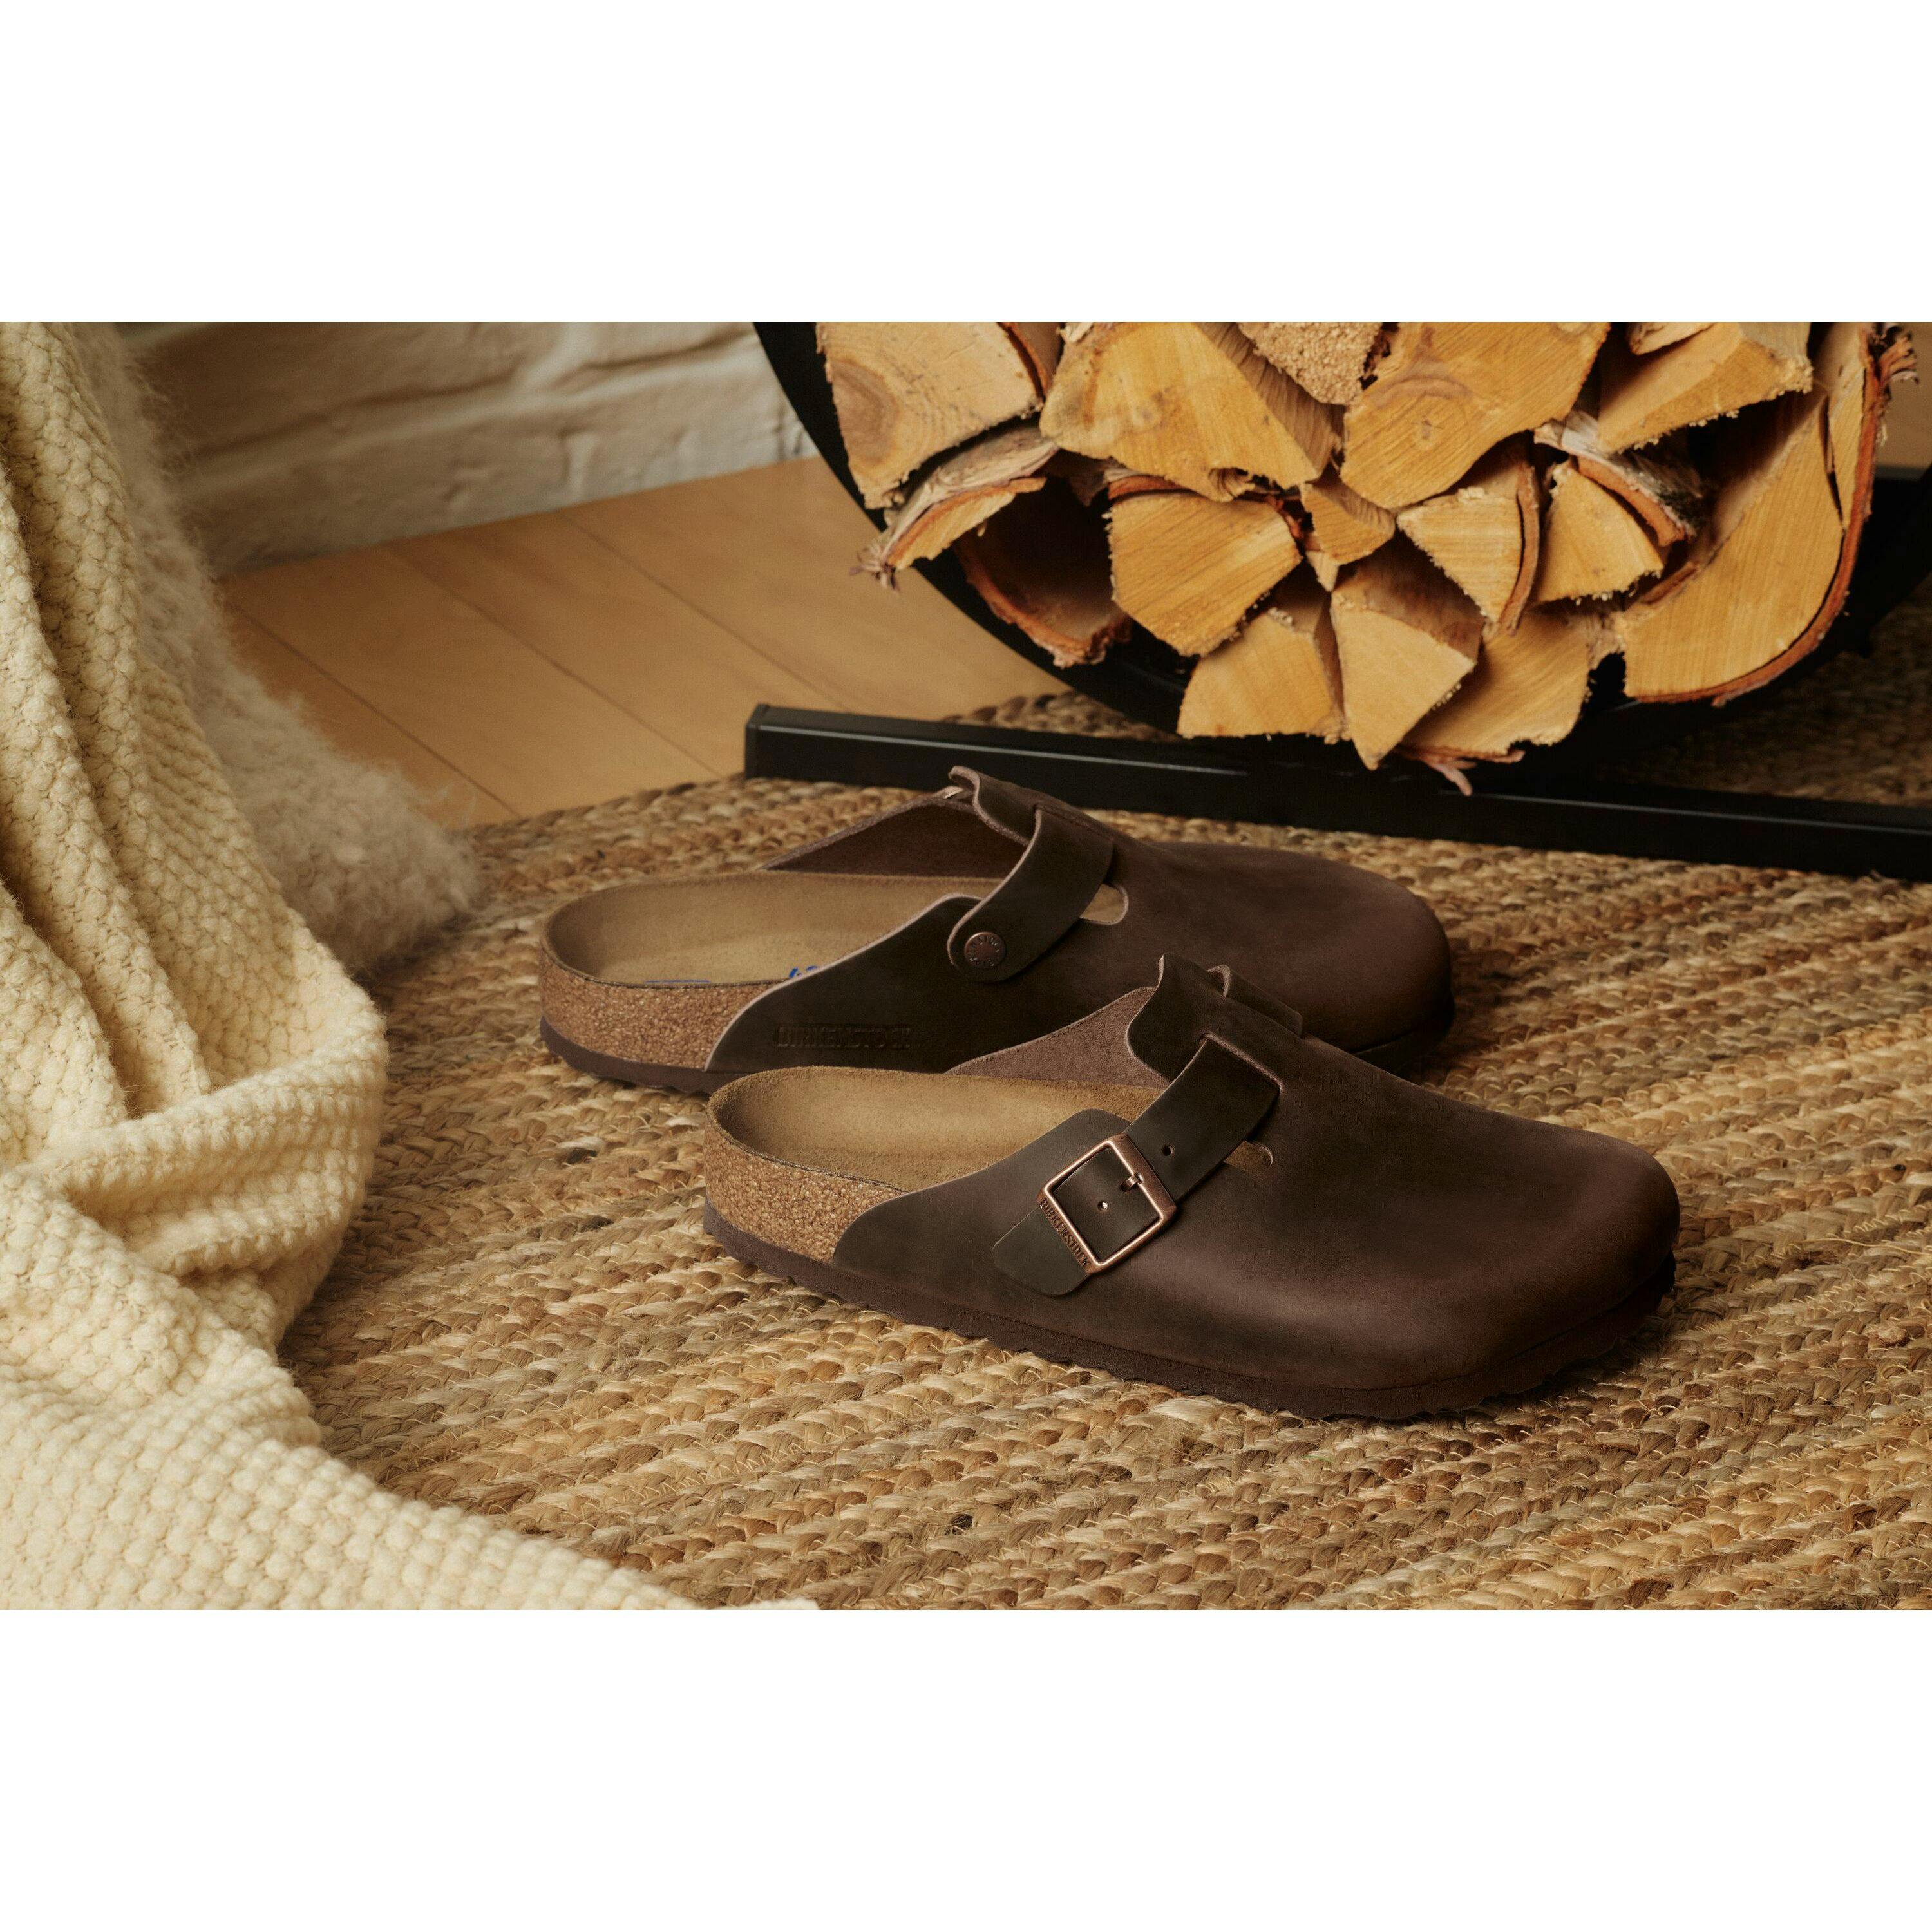 Simple Shoes - Original Clog - Leather M4 / W6 / Brown